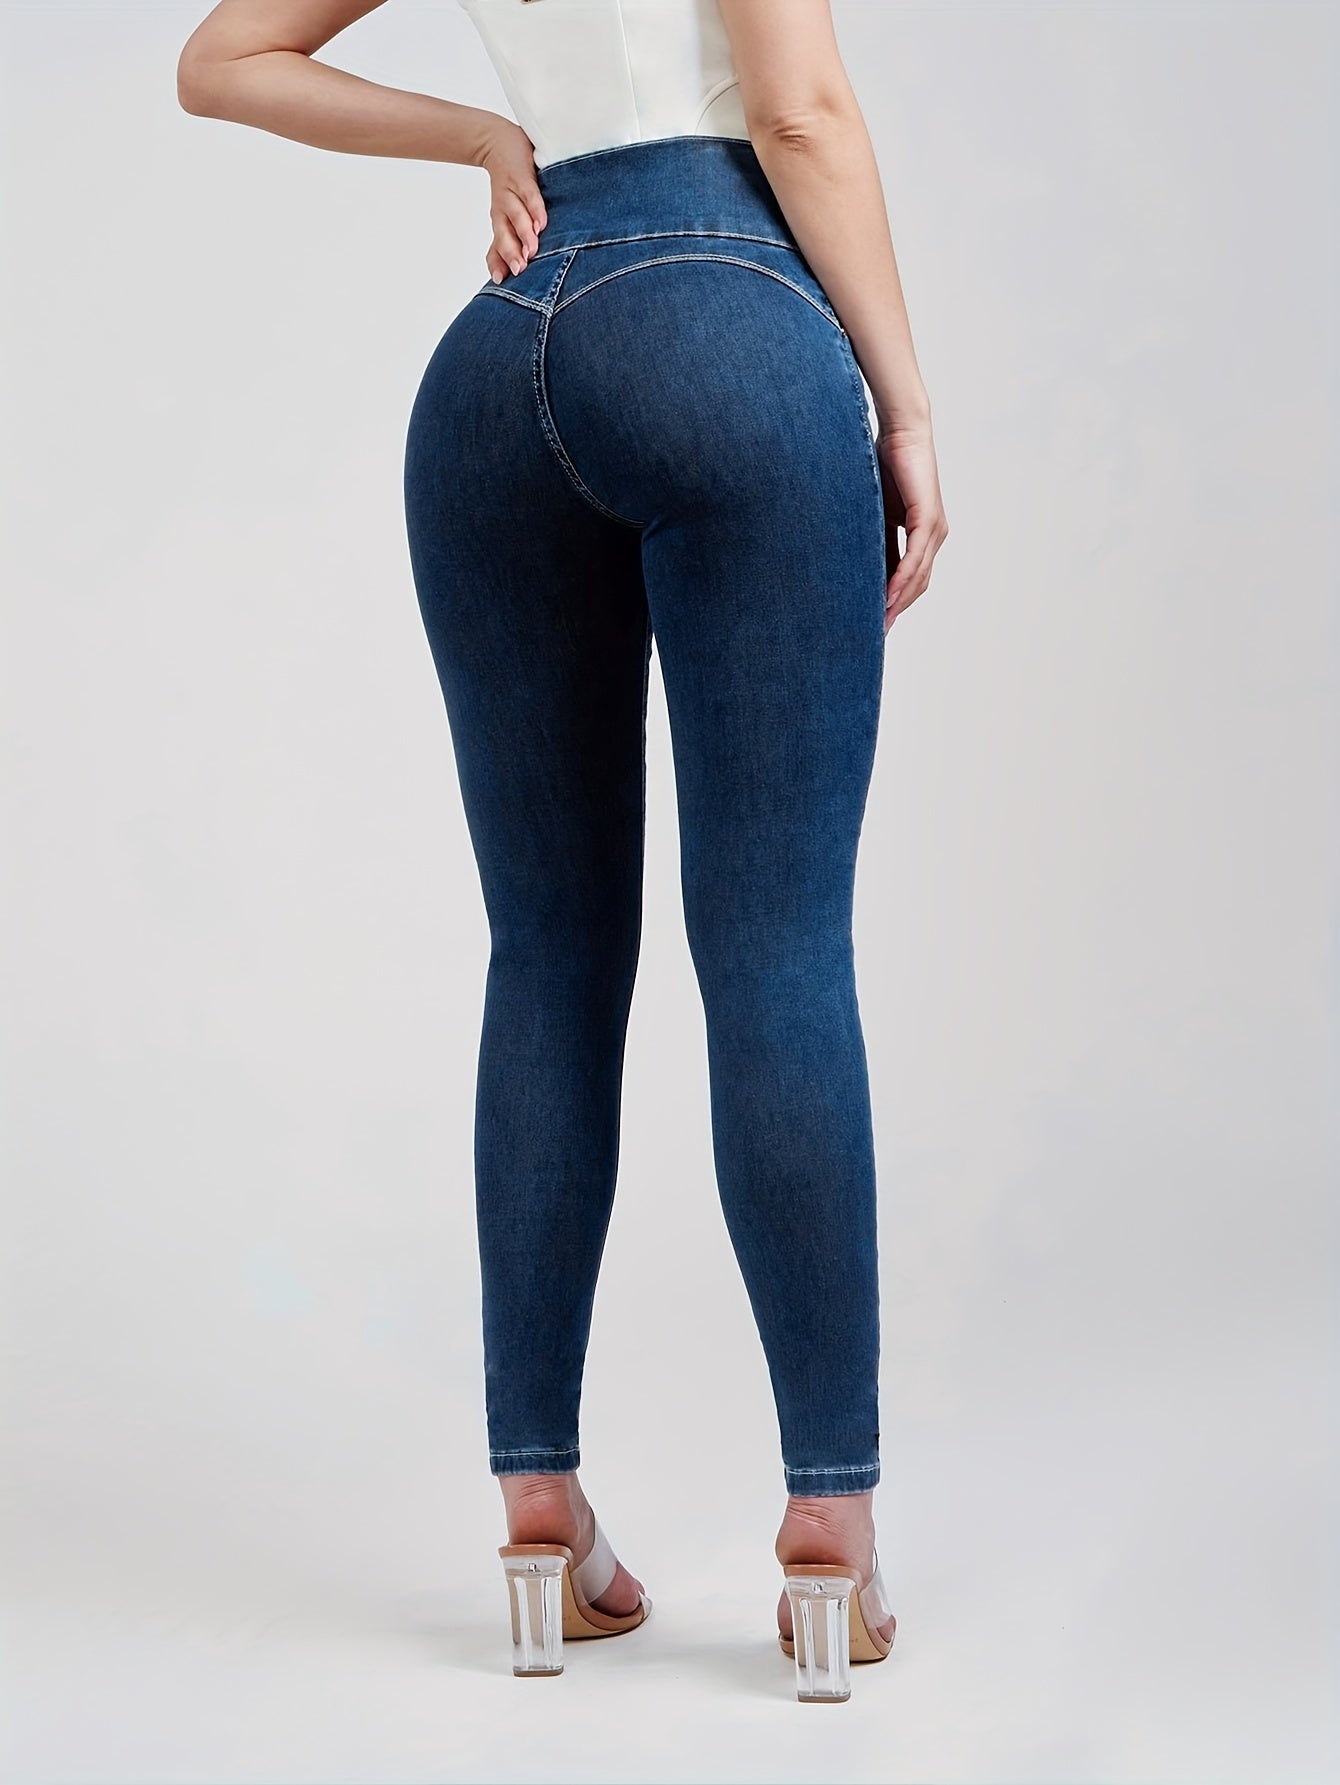 Women's Single-breasted High Waist Skinny Jeans, Multi-button Slash Pocket Sexy Solid Color Denim Pants